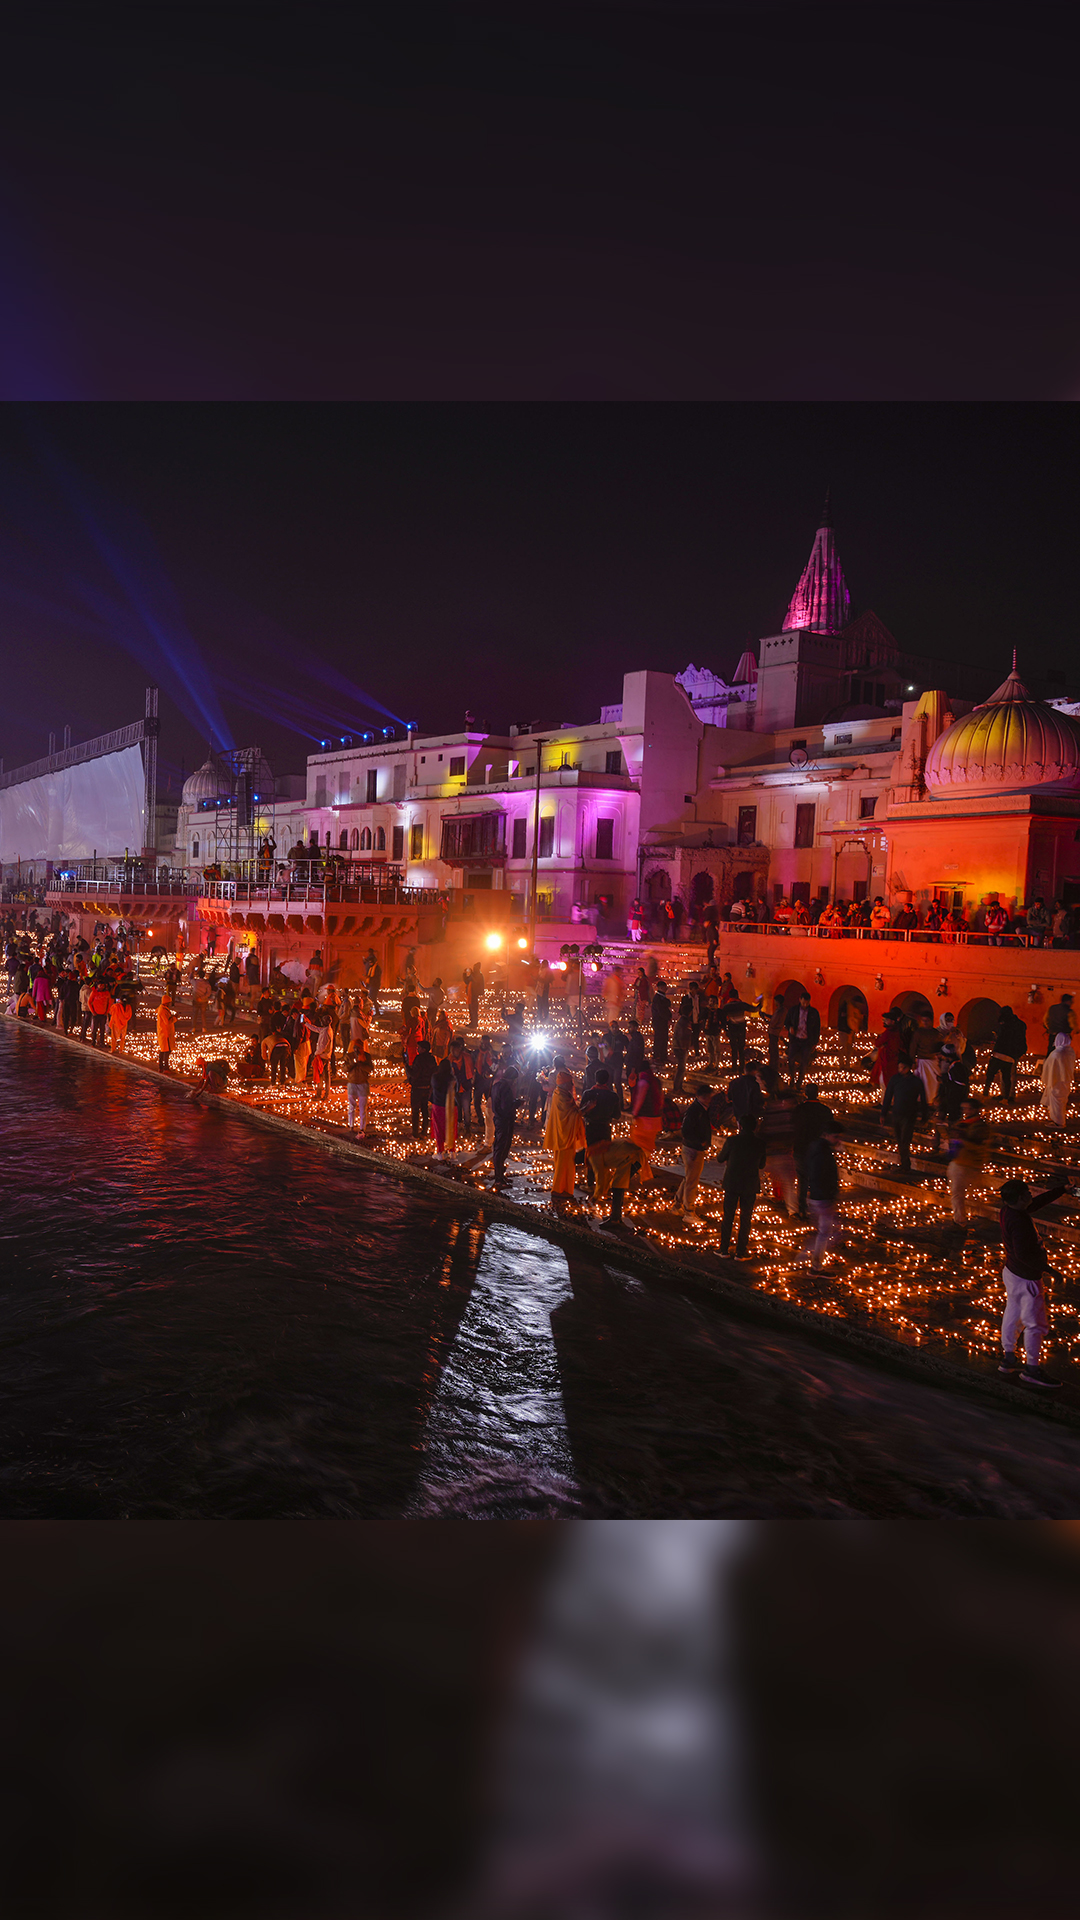 Devotees at the illuminated Saryu Ghat with earthen lamps (diyas) to mark Ram Temple's 'Pran Pratishtha' in Ayodhya